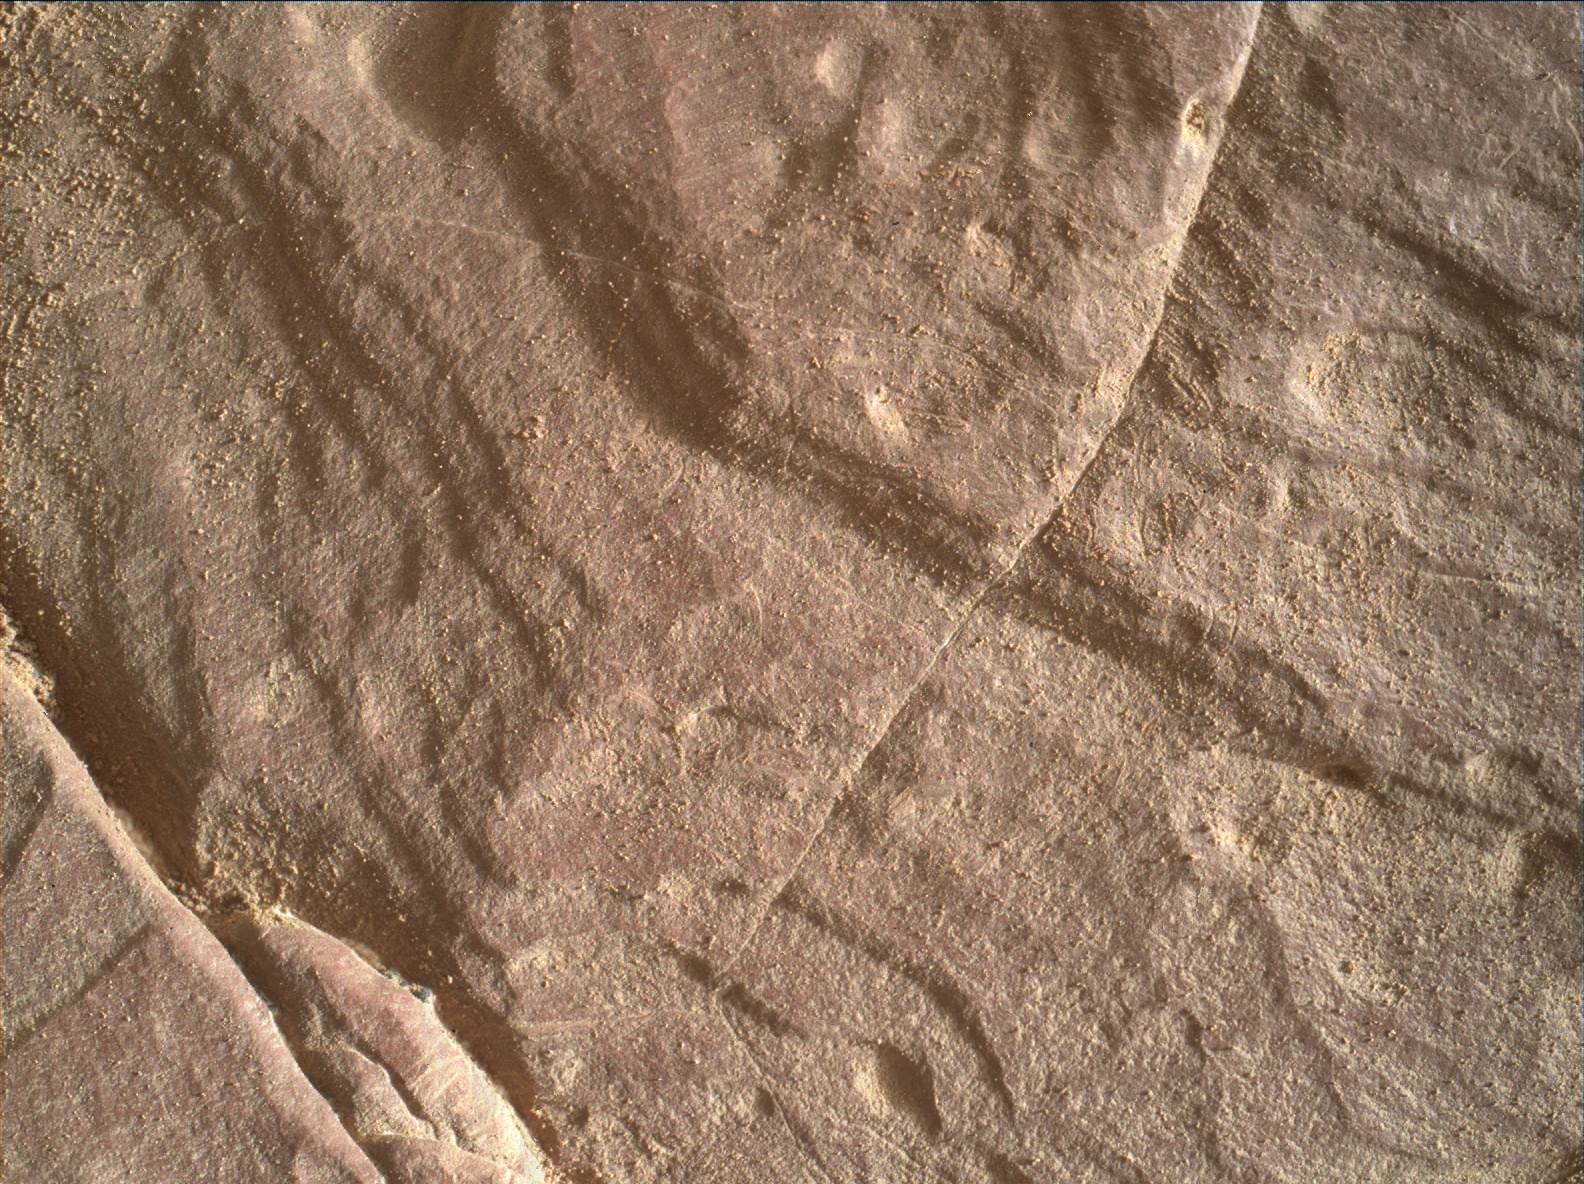 Nasa's Mars rover Curiosity acquired this image using its Mars Hand Lens Imager (MAHLI) on Sol 1819